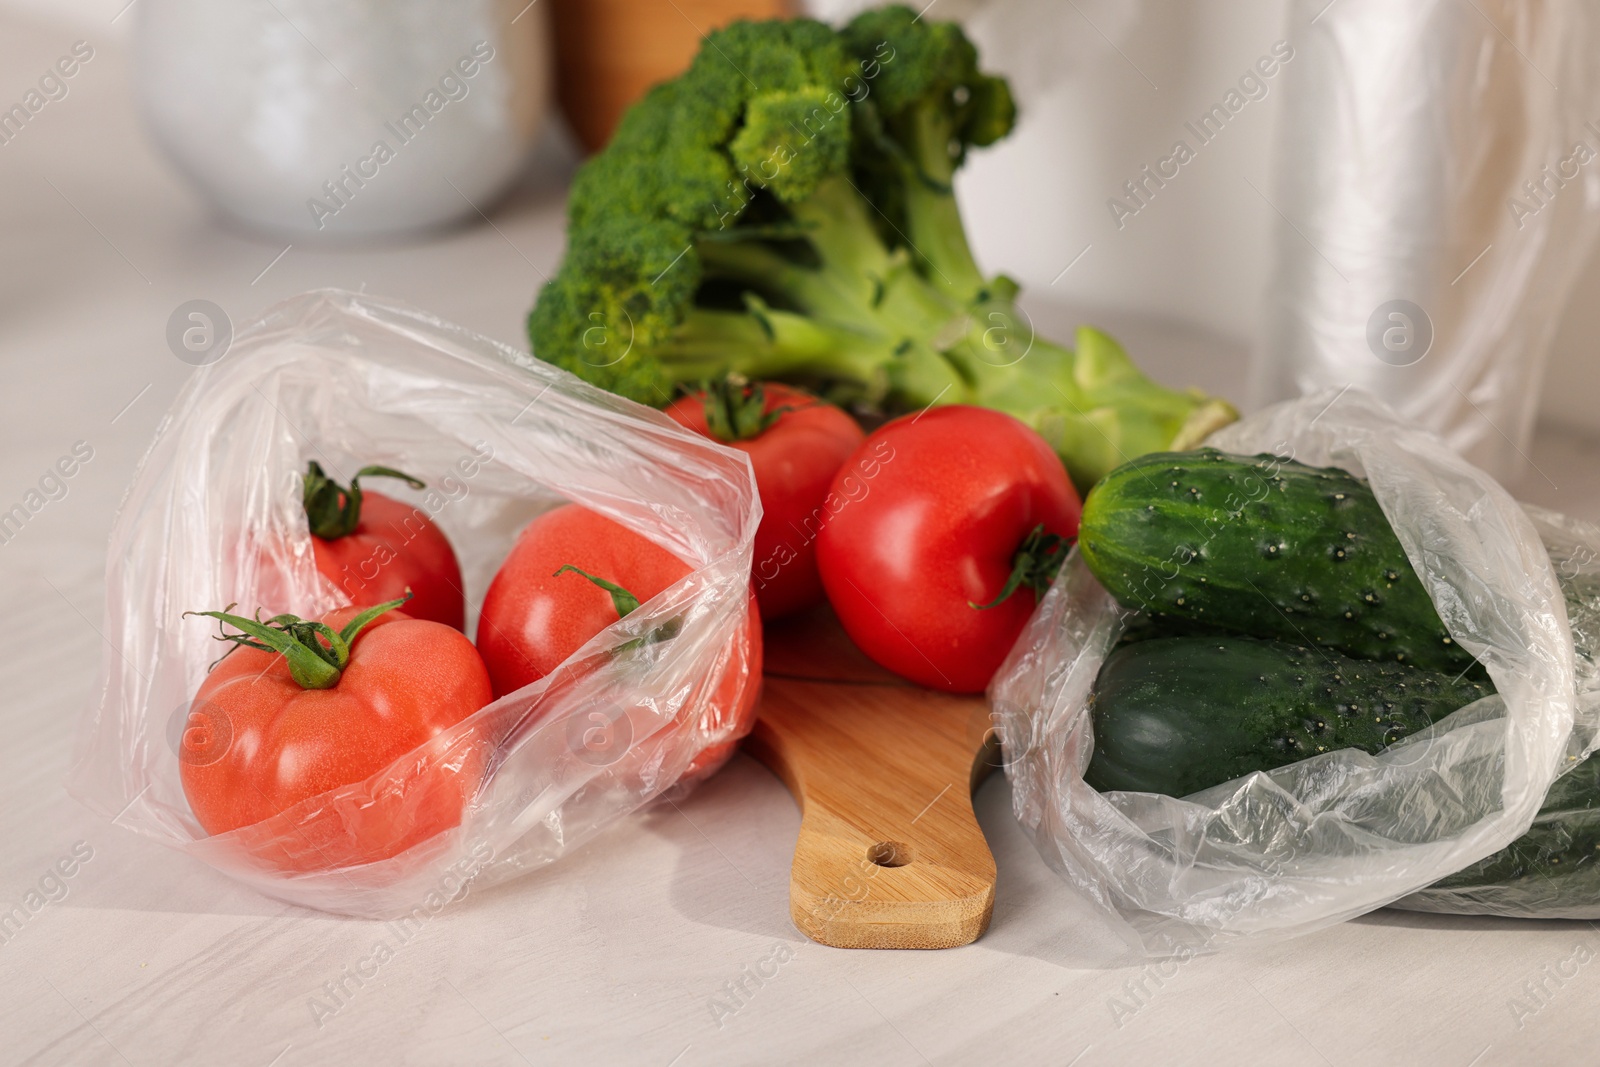 Photo of Plastic bags and fresh vegetables on white table, closeup